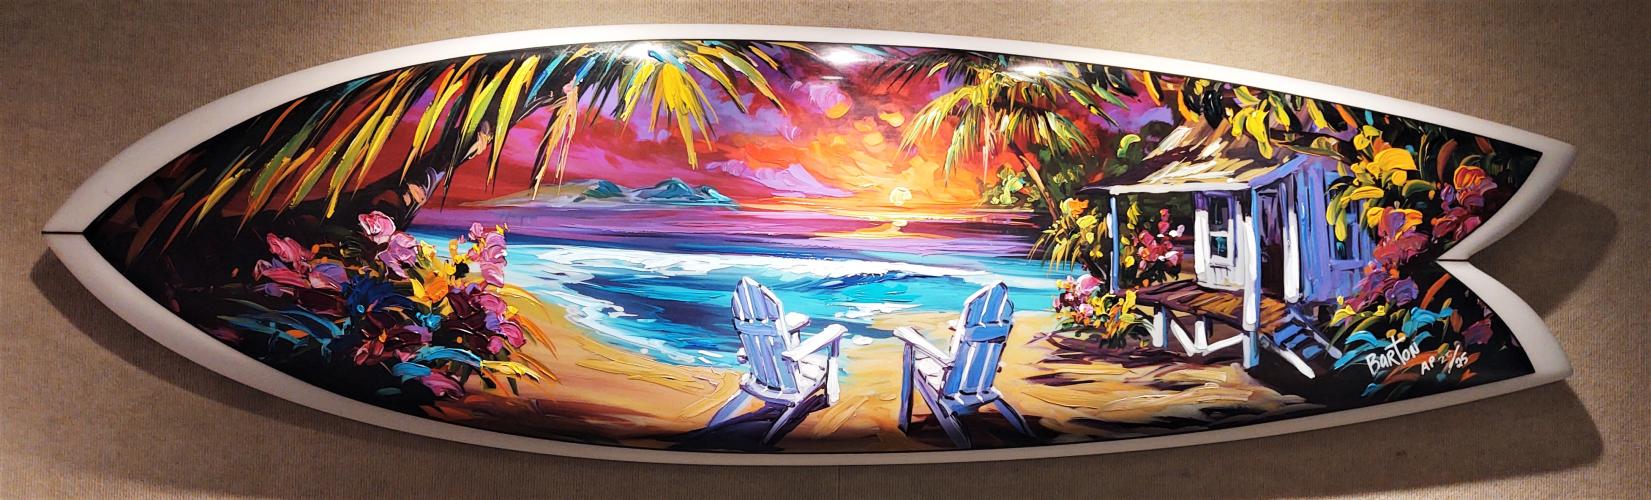 <b>*NEW*</b> Endless Love 21x72 Surfboard Giclee #20/25 SOLD OUT EDITION by Steve Barton